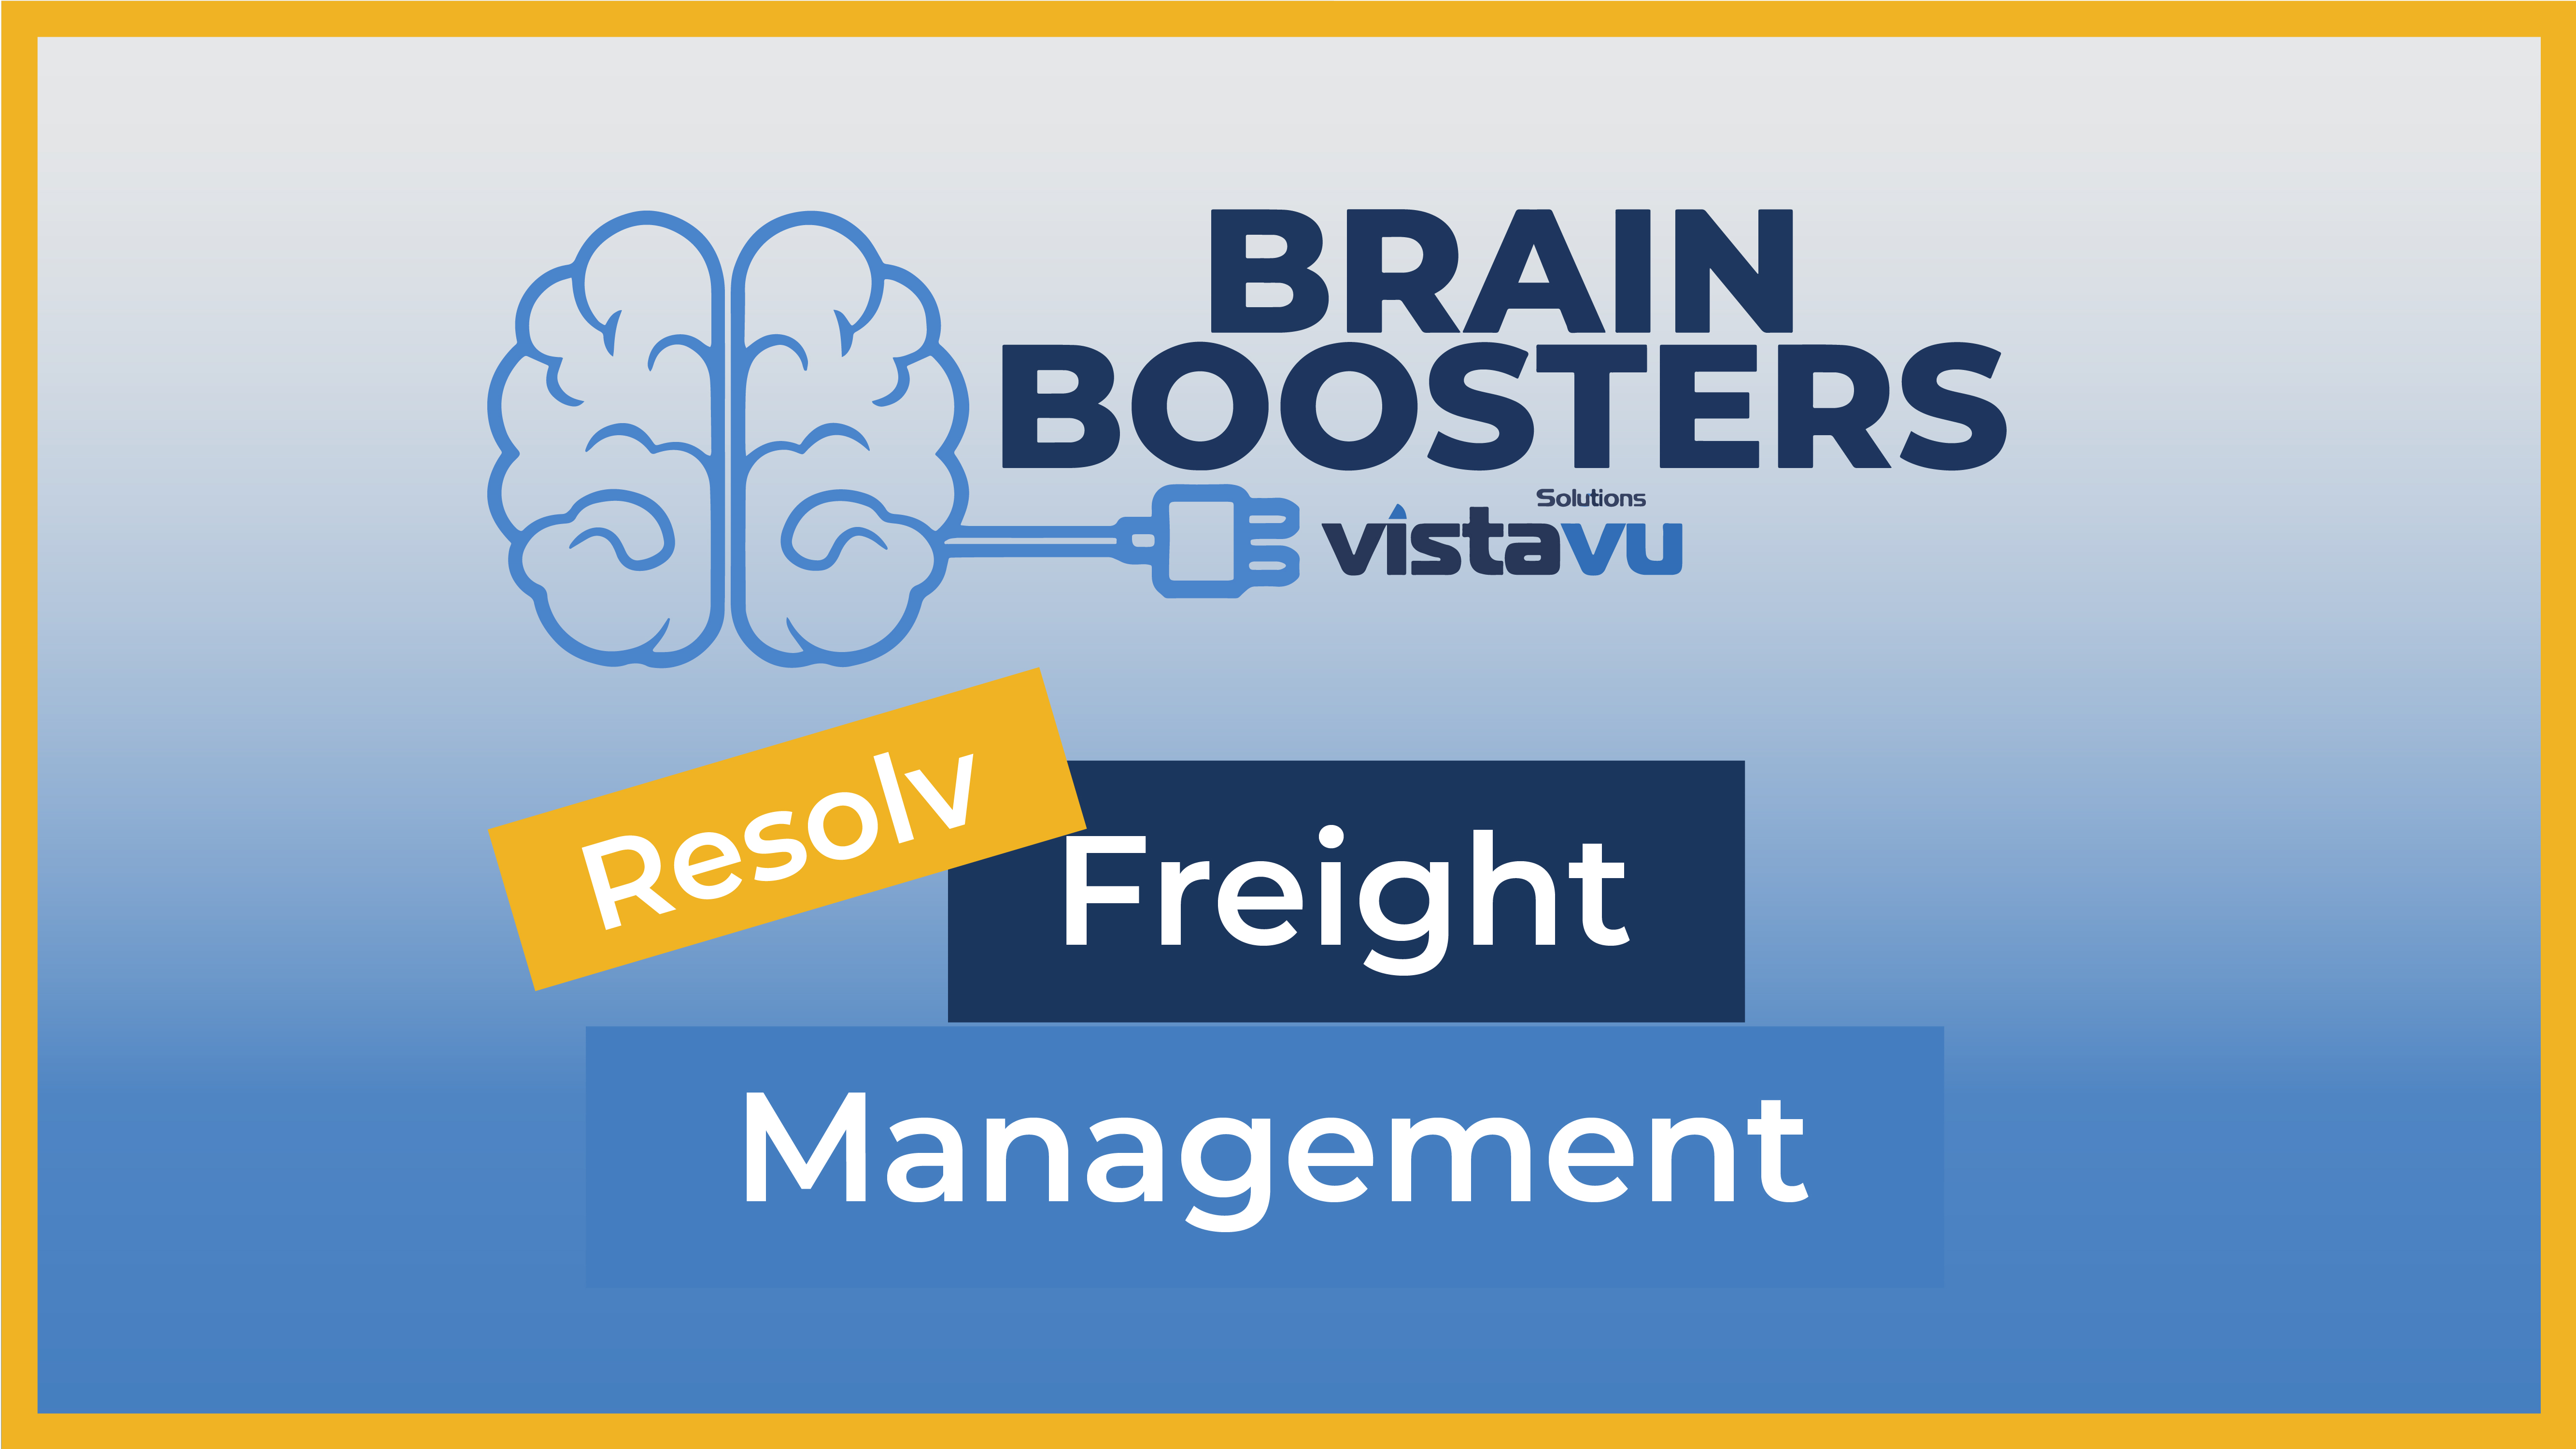 [Brain Boosters] Resolv Freight Management in SAP Business One